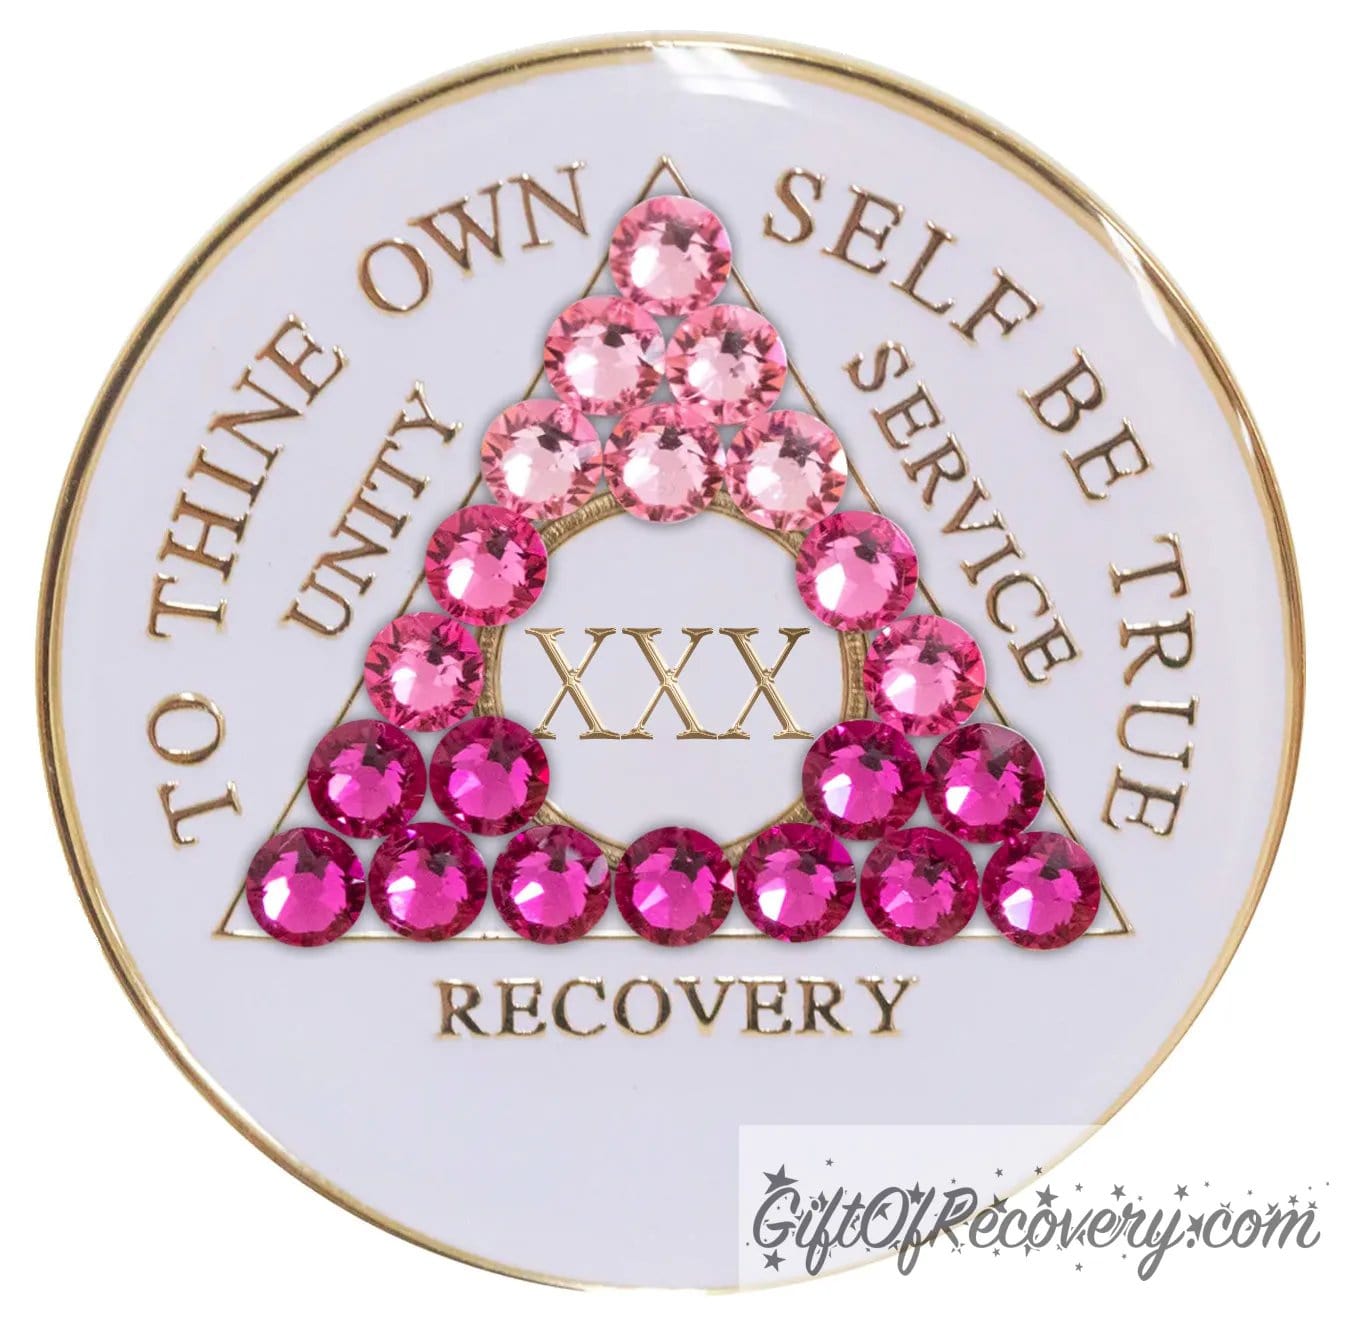 30 year pearl white AA medallion with 21 genuine crystals in the shape of the triangle and ranging from light to dark pink, representing the transformation of your sobriety journey, the AA moto along with the roman numeral and rim of medallion are 14k gold plated brass and sealed with resin for a glossy finish.